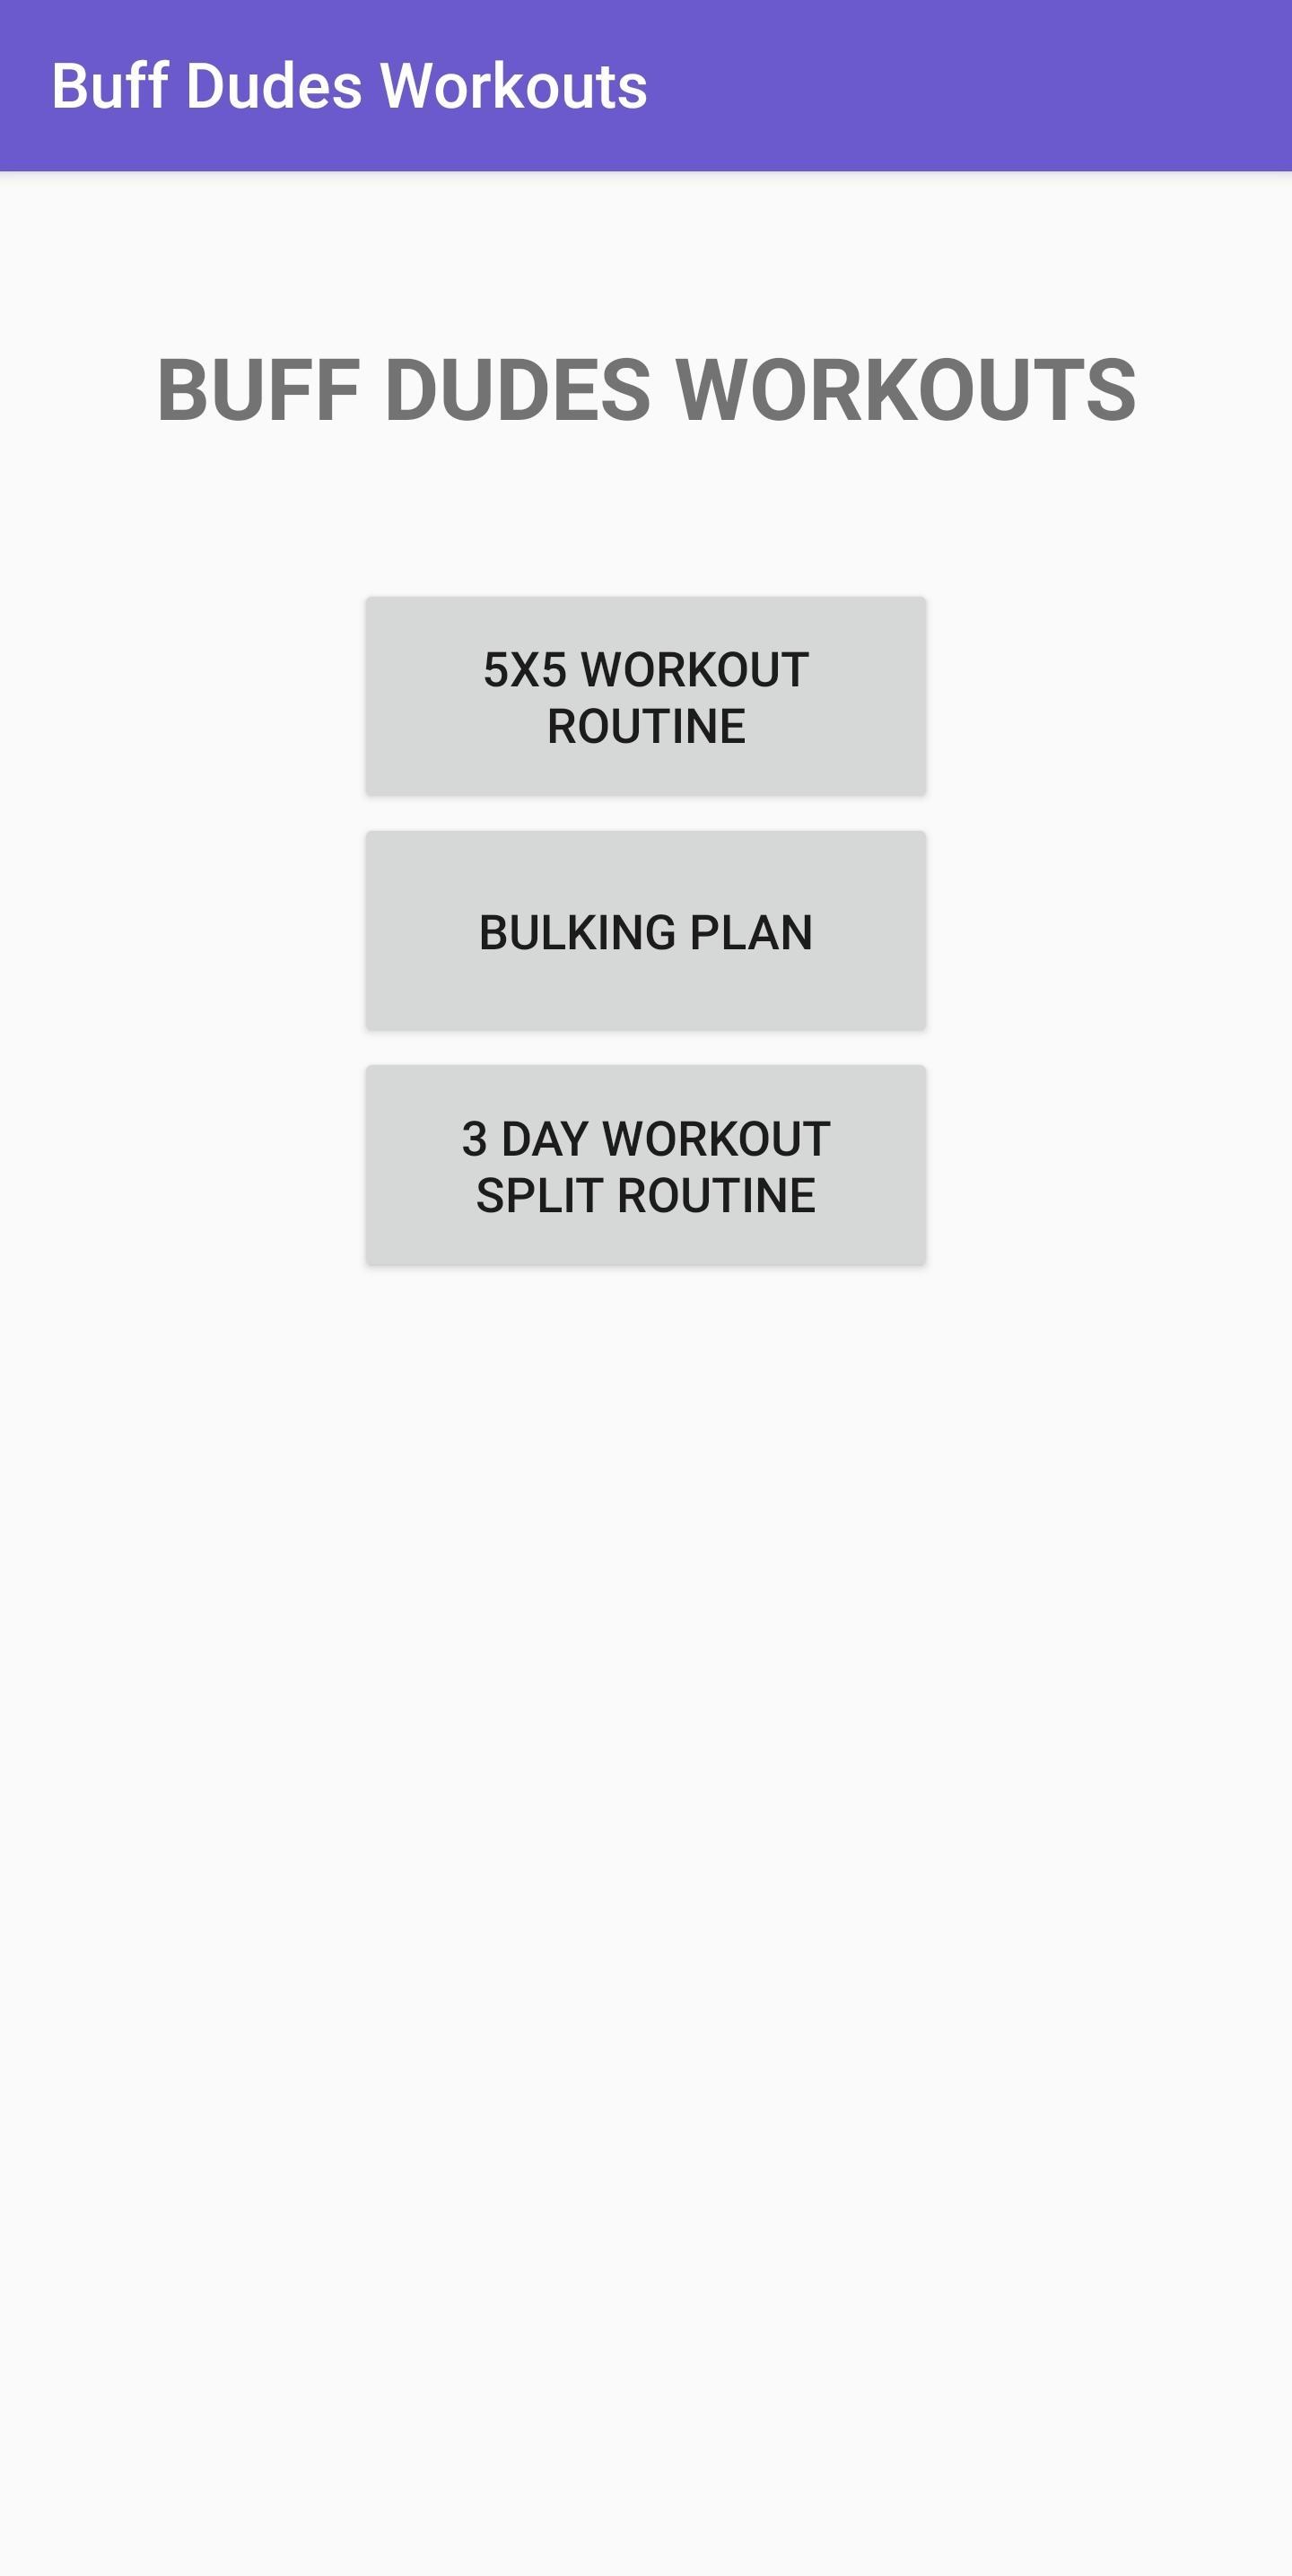 Buff Dudes Workouts App for Android - APK Download